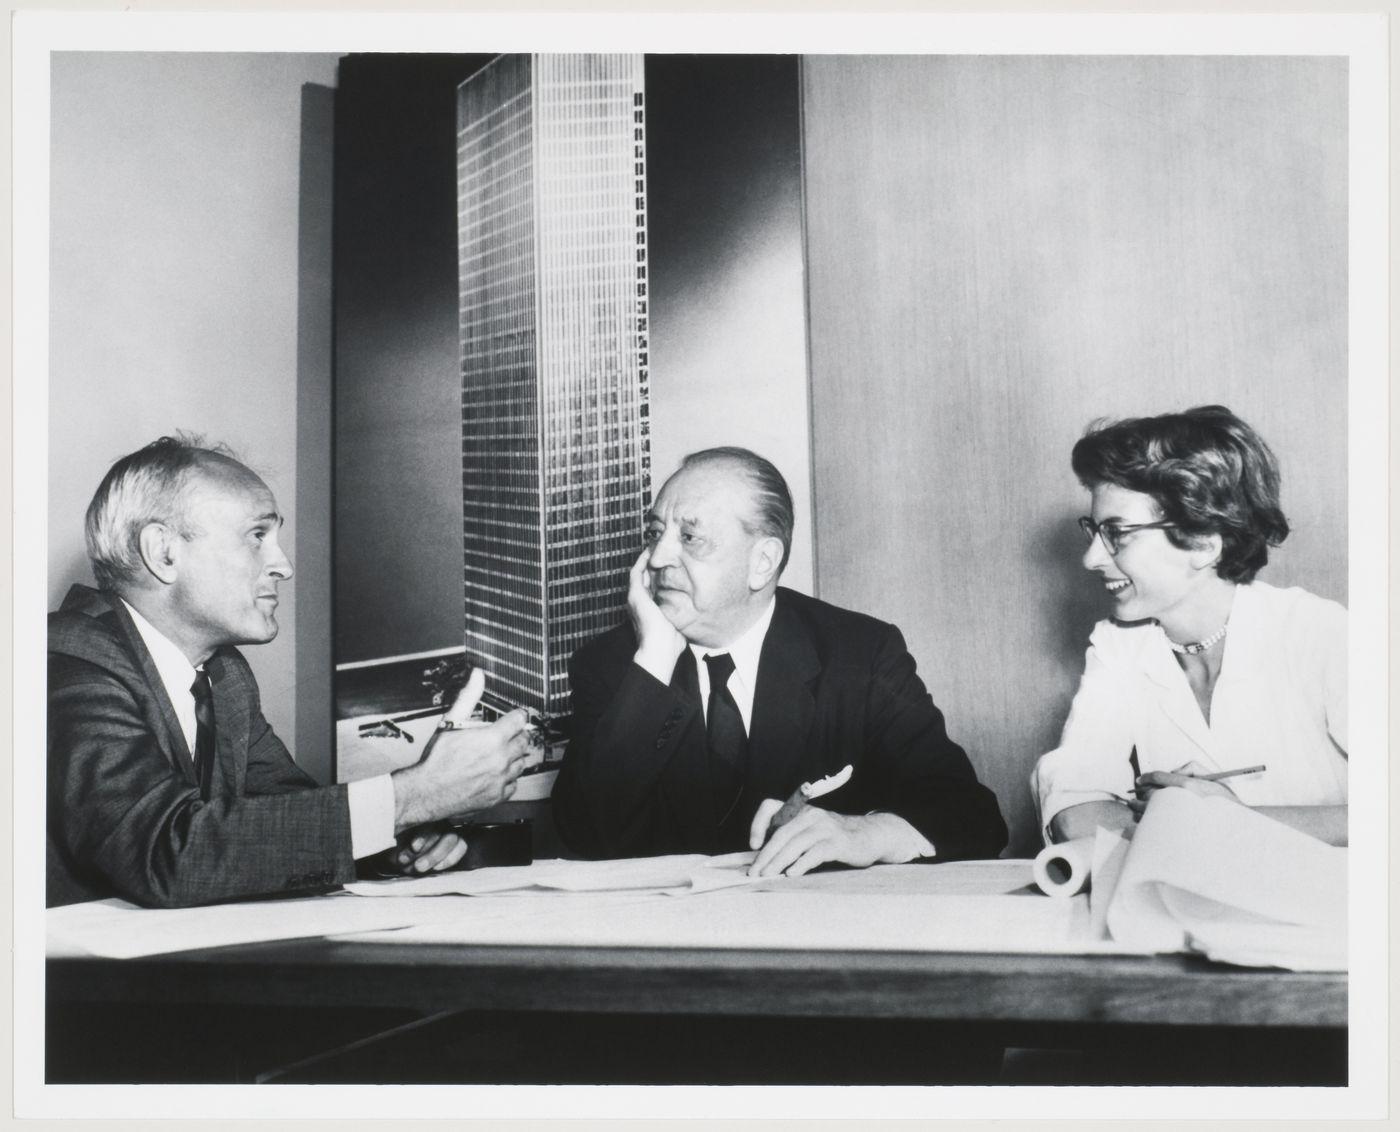 Philip Johnson, Mies van der Rohe and Phyllis Lambert in front of an image of the model for the Seagram Building, New York City (Ludwig Mies van der Rohe, Philip Johnson, architects; Kahn & Jacobs, associate architects, 1954-58)